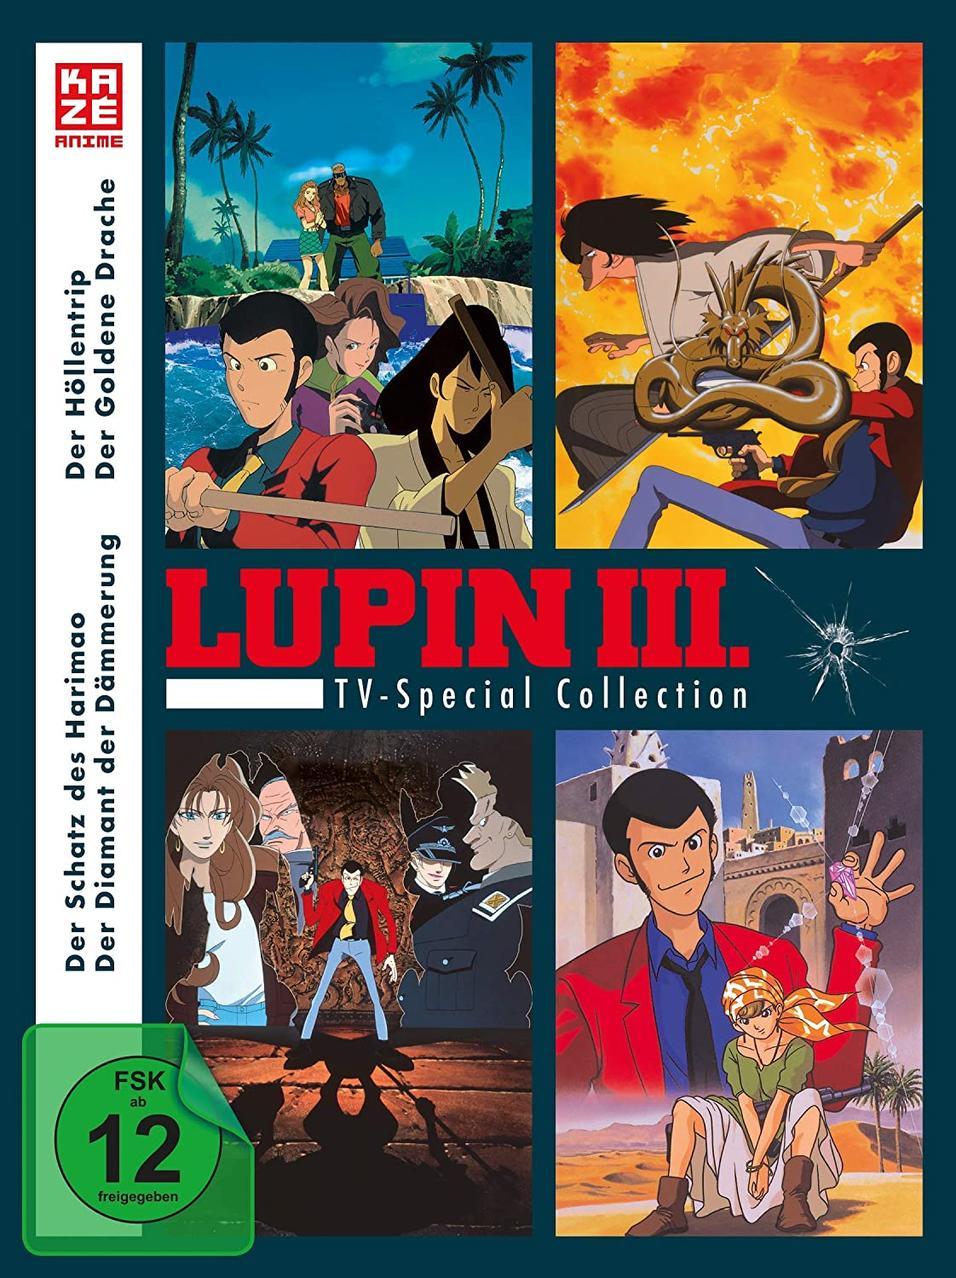 TV-SPECIALS DVD - THE THIRD LUPIN